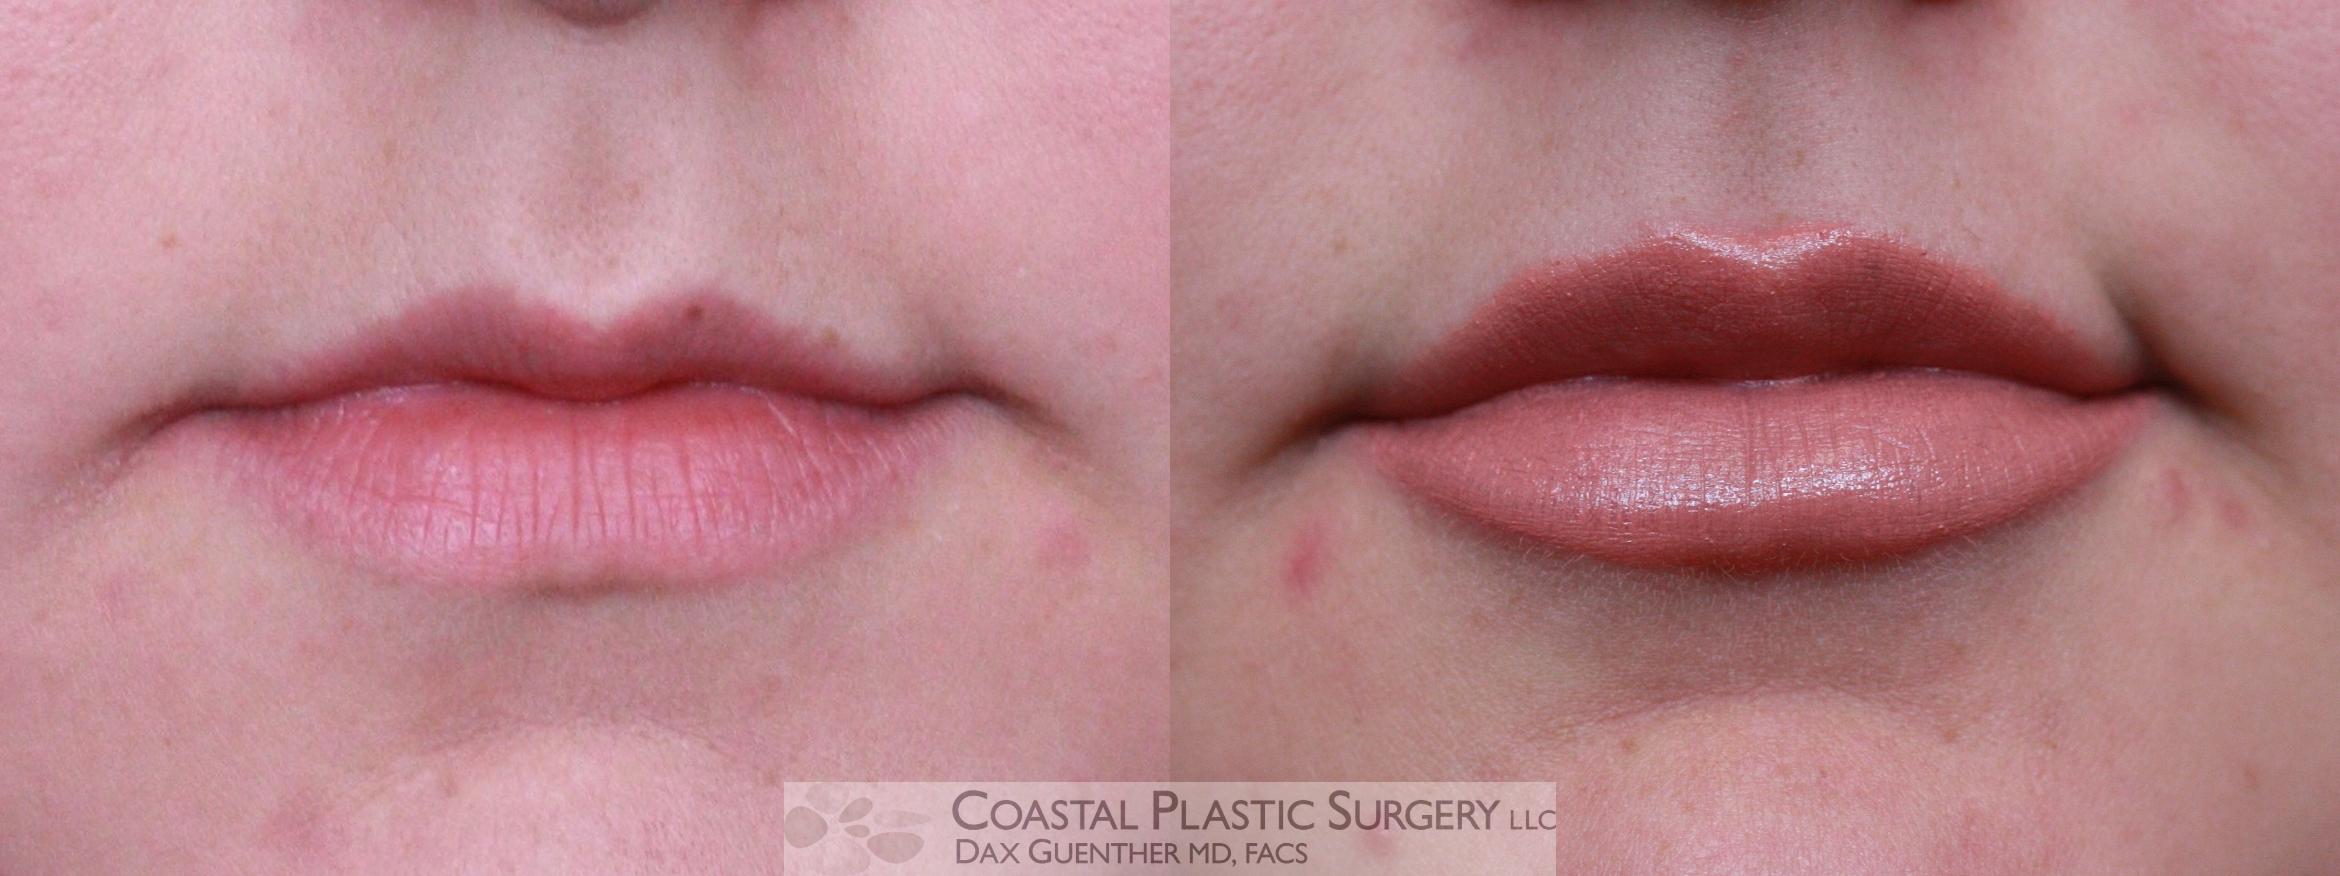 Before & After Fillers & Threads Case 93 Front View in Hingham, Boston & Nantucket, MA